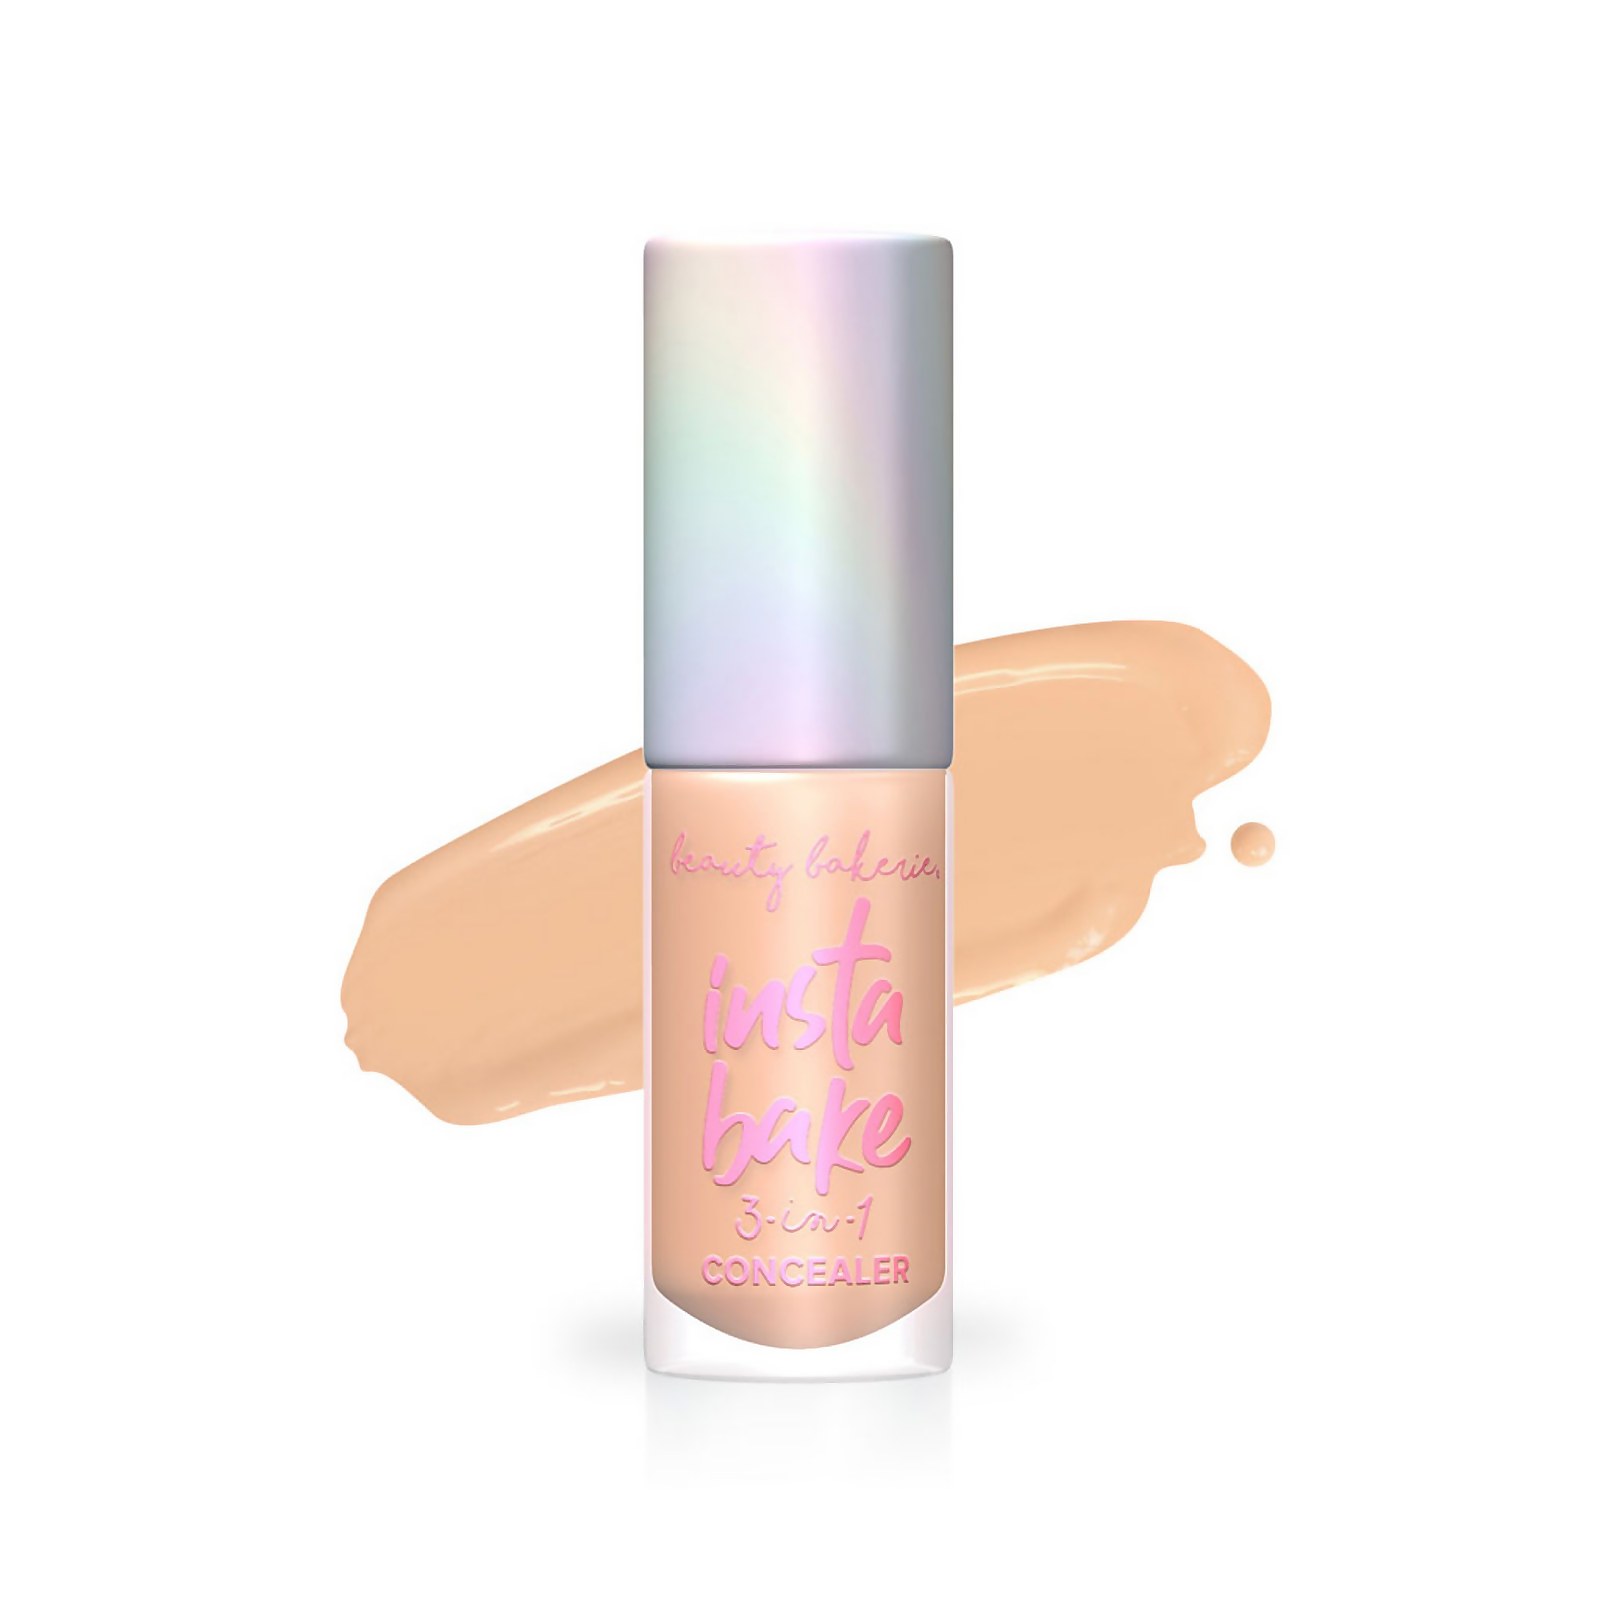 Beauty Bakerie InstaBake 3-in-1 Hydrating Concealer (Various Shades) - 014 I Chews Me